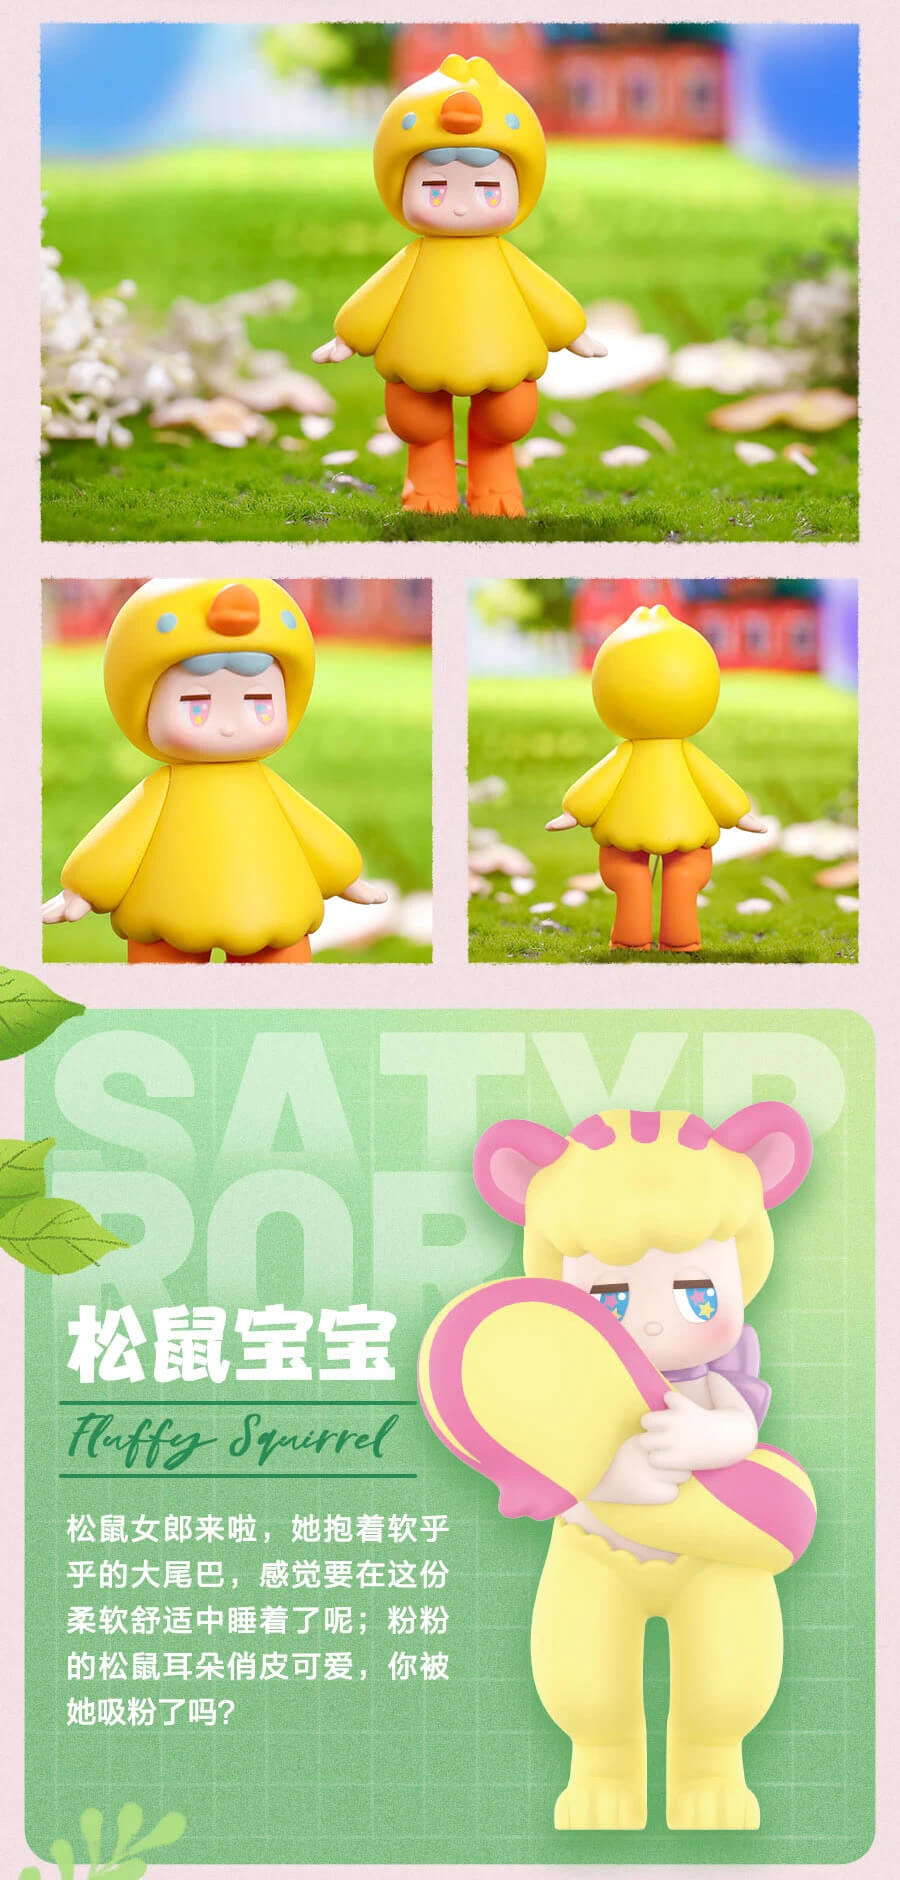 Details about   POP MART x SEULGIE SATYR RORY Cuddly Cuddlesome Baby in Hood Mini Figure Art Toy 